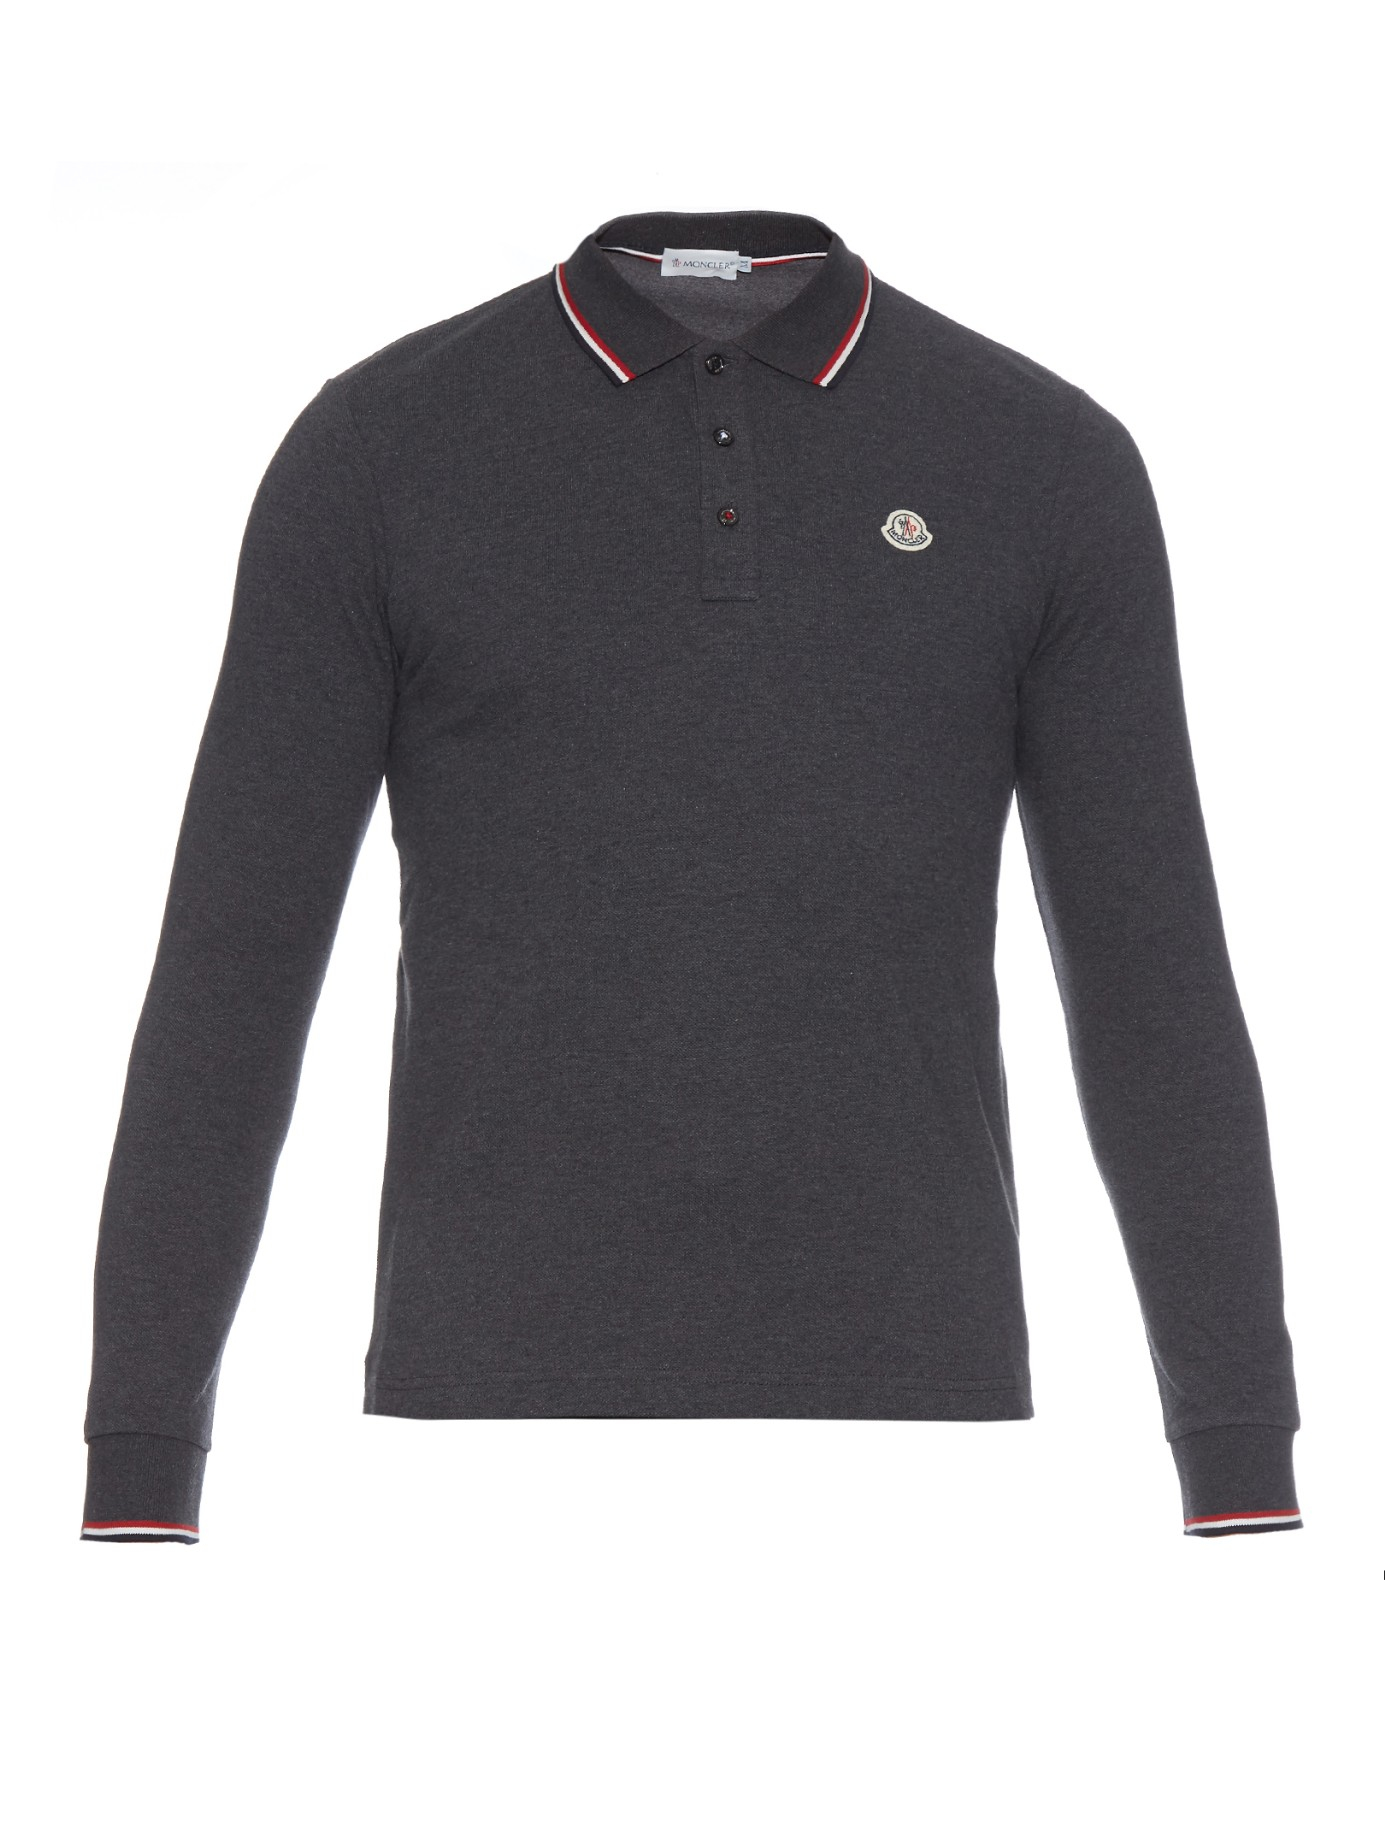 Moncler Long-sleeved Cotton-piqué Polo Shirt in Charcoal (Gray) for Men -  Lyst